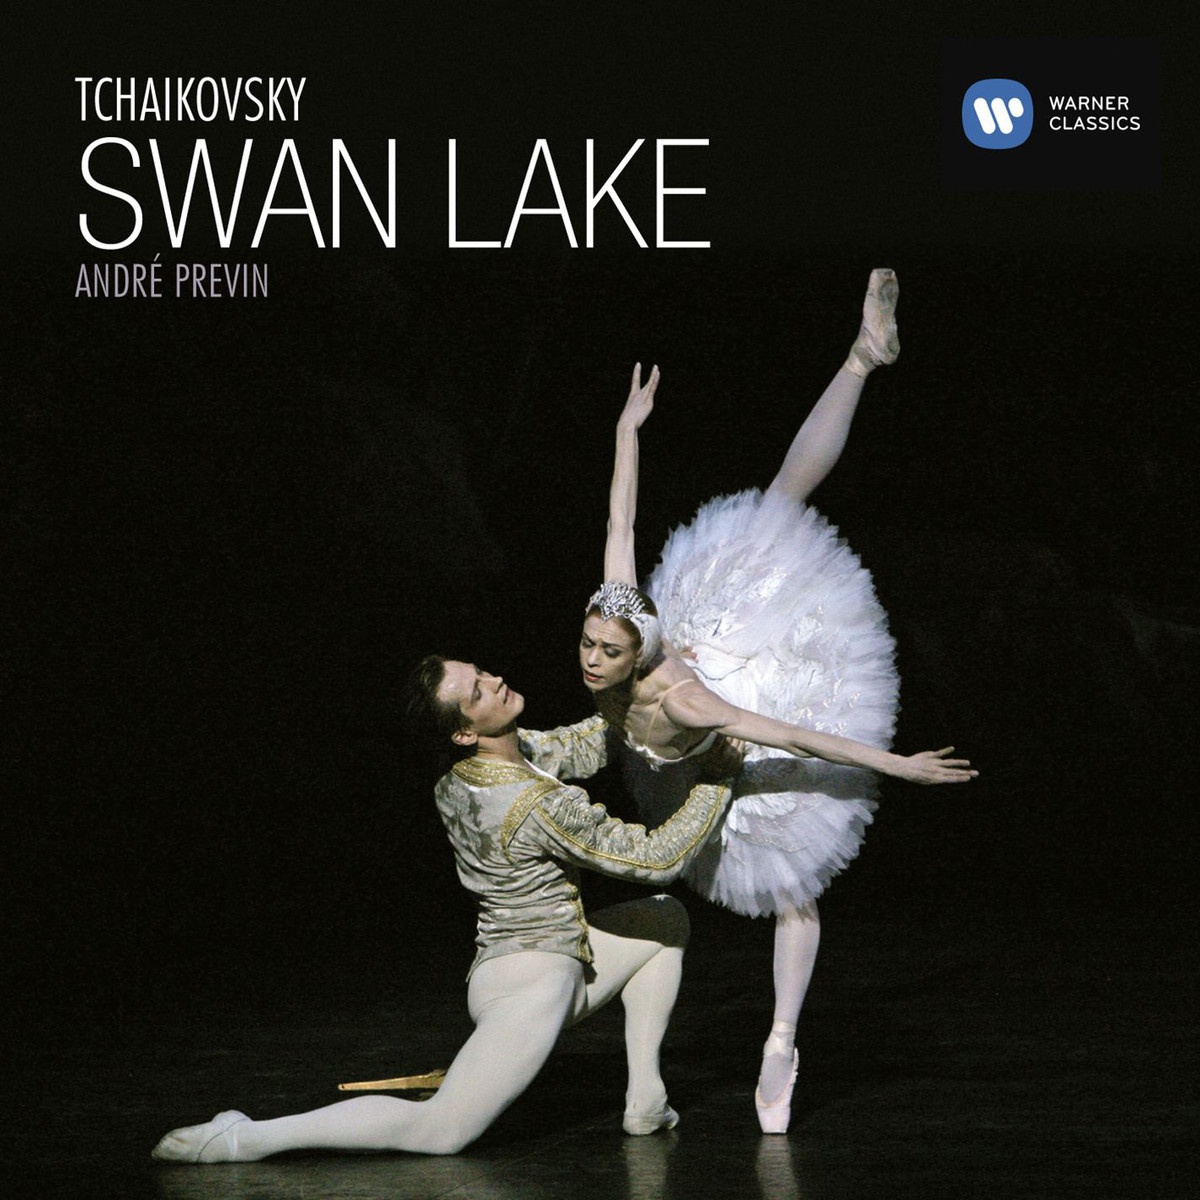 Swan Lake  Ballet in four acts Op. 20, Act II, 13. Dances of the Swans: II.    Moderato assai  Molto piu mosso